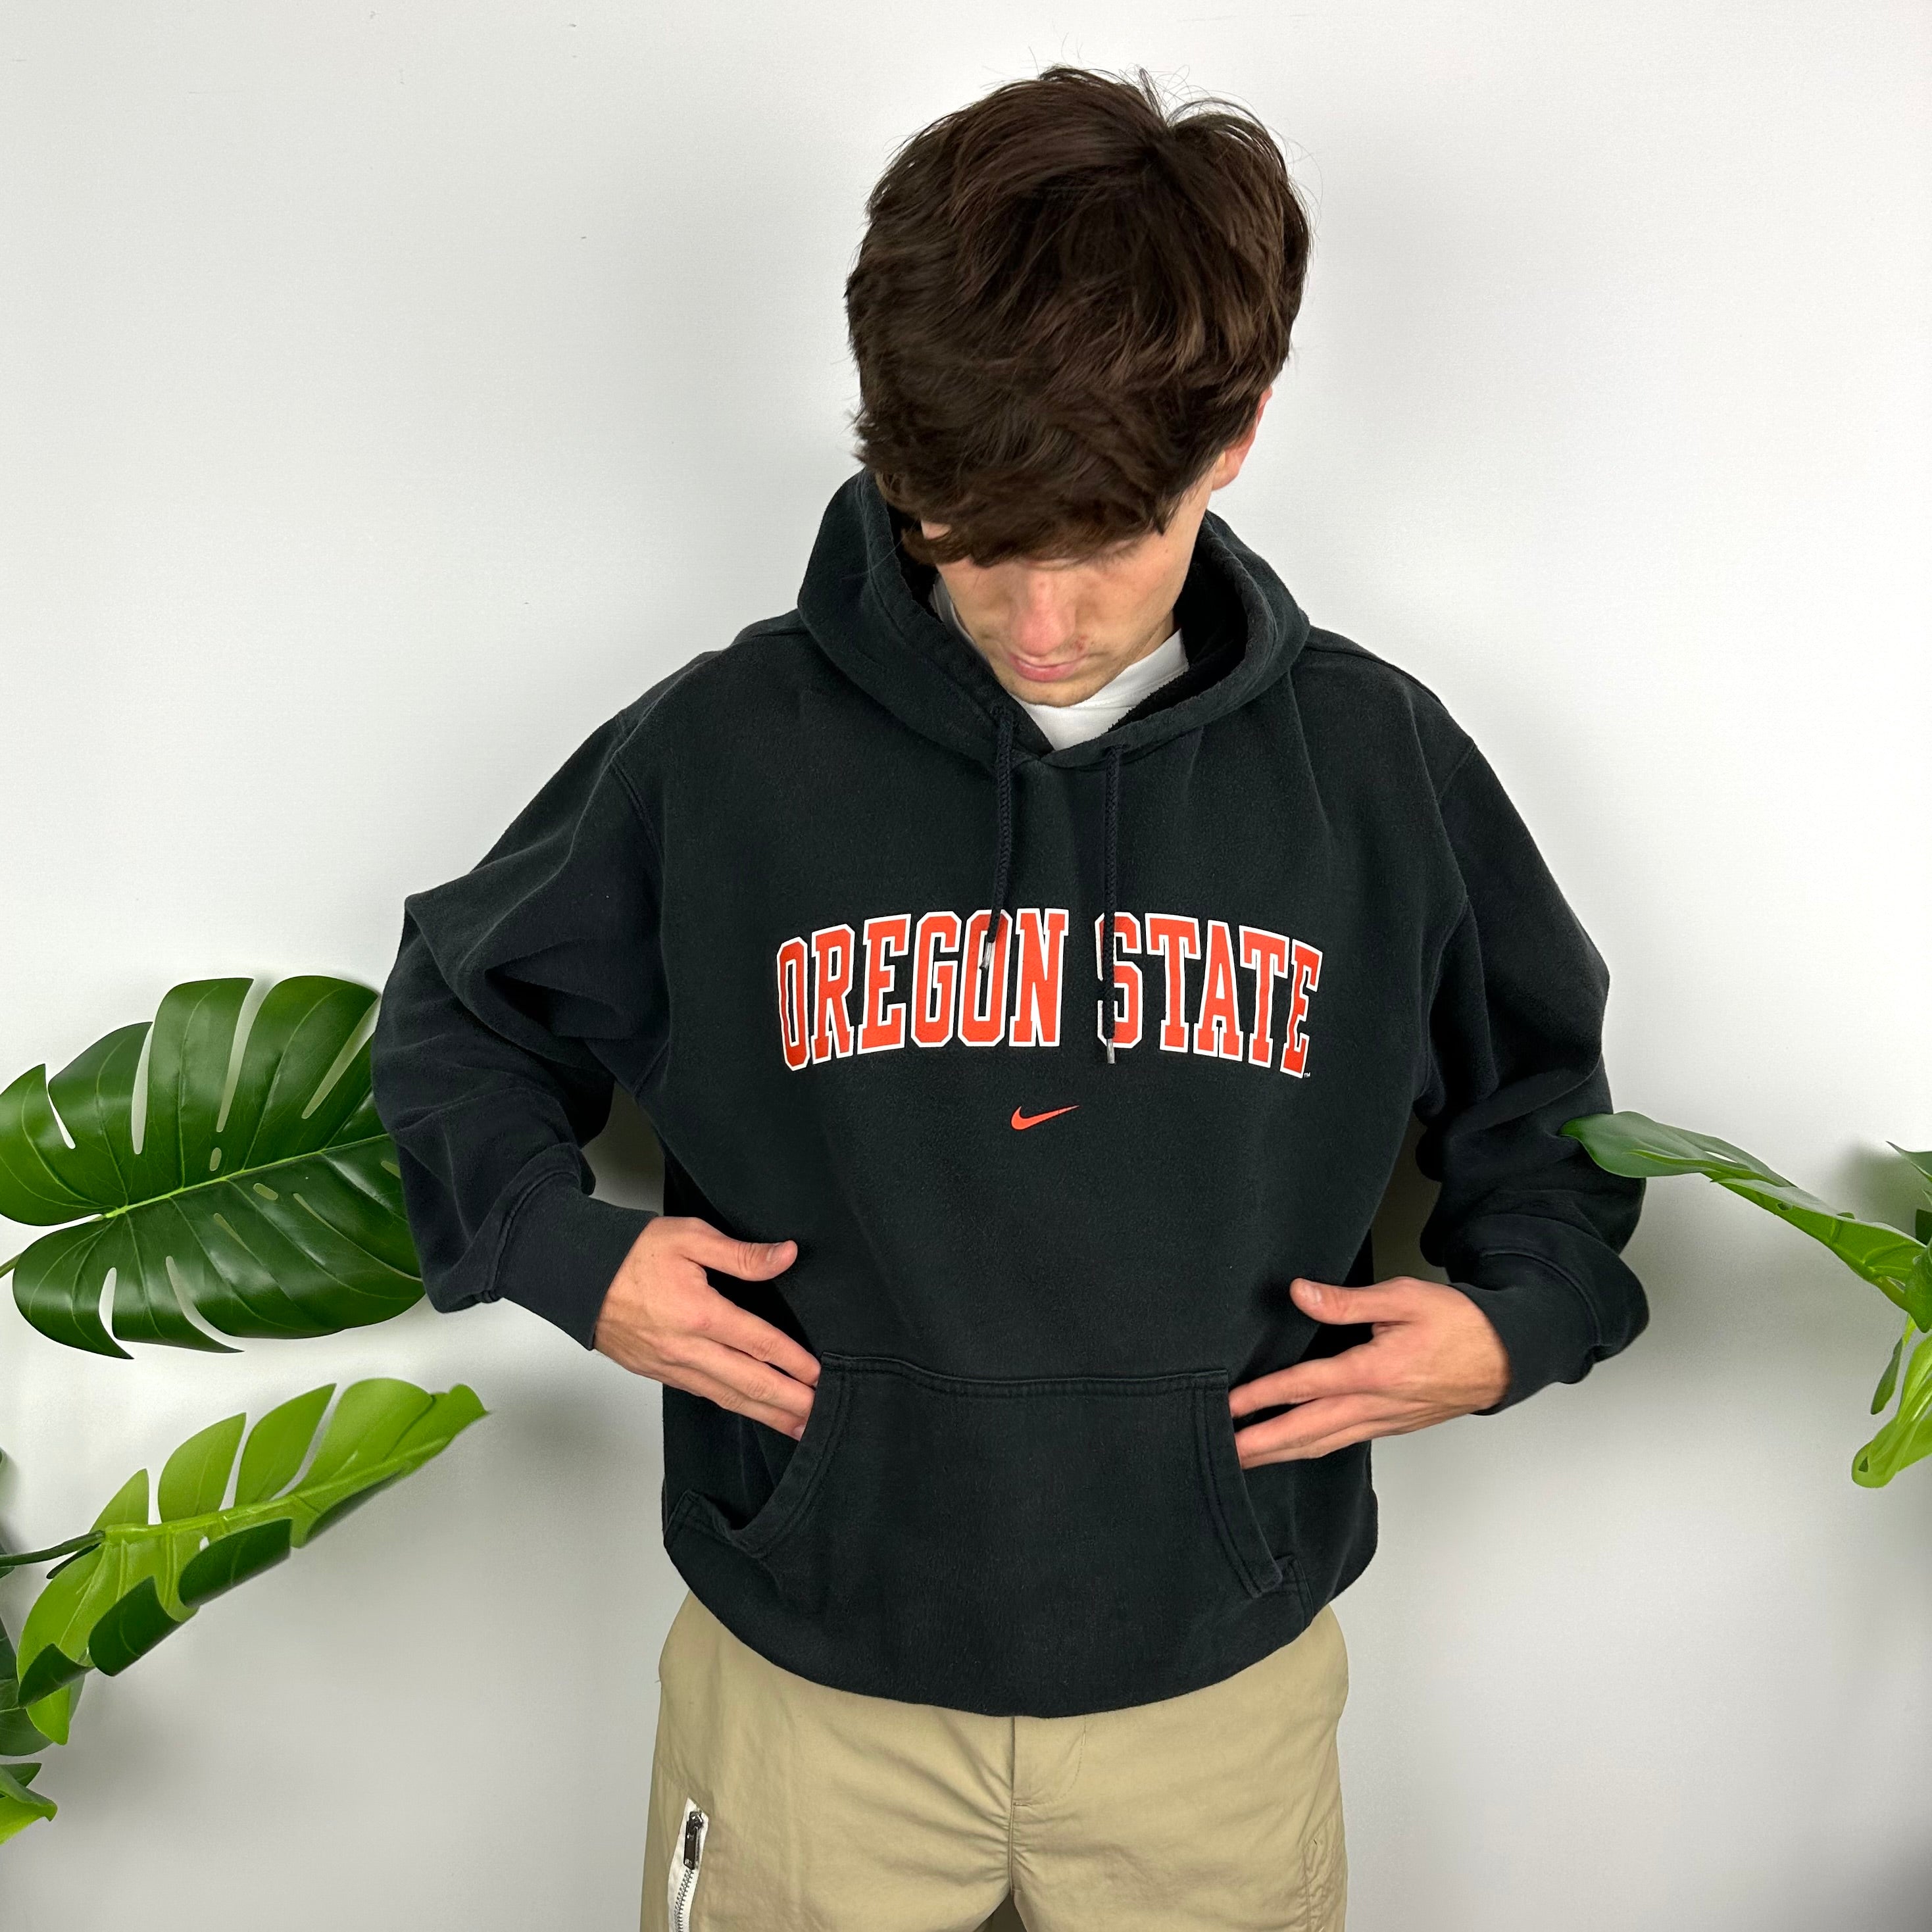 Nike x Oregon State Black Spell Out Hoodie (L)